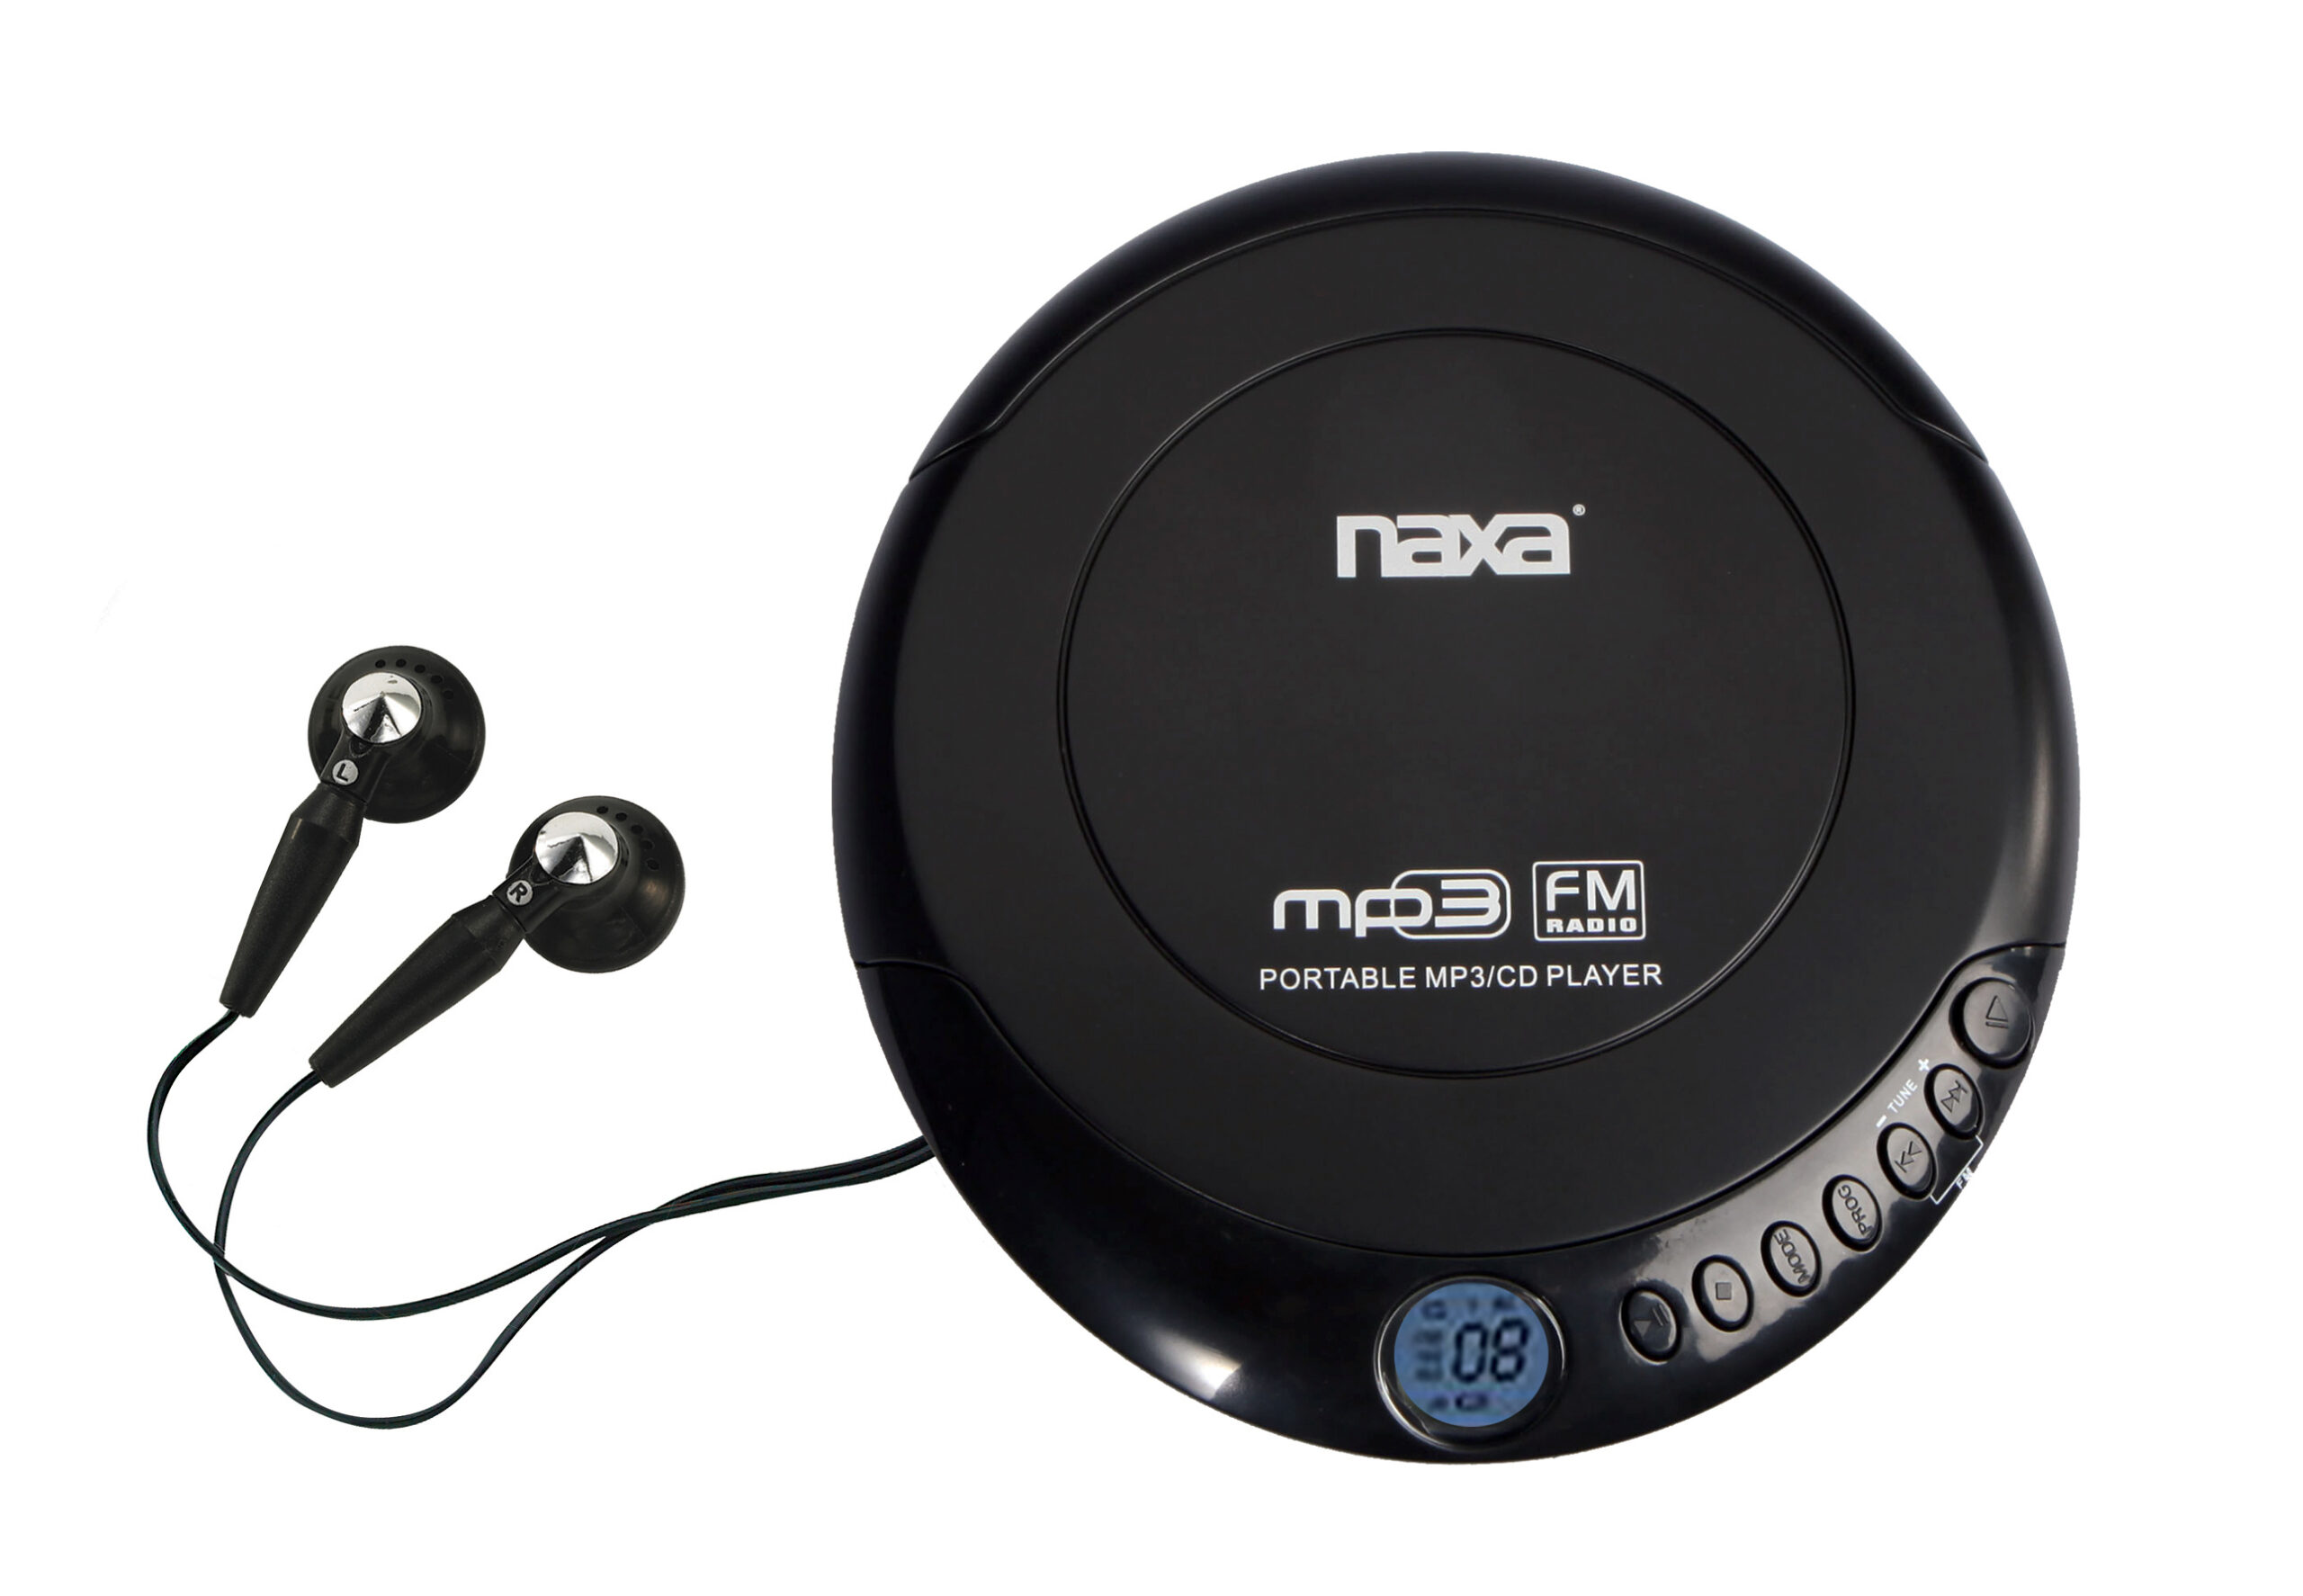 Slim Personal MP3/CD Player with 100 Second Anti-Shock & FM Scan Radio